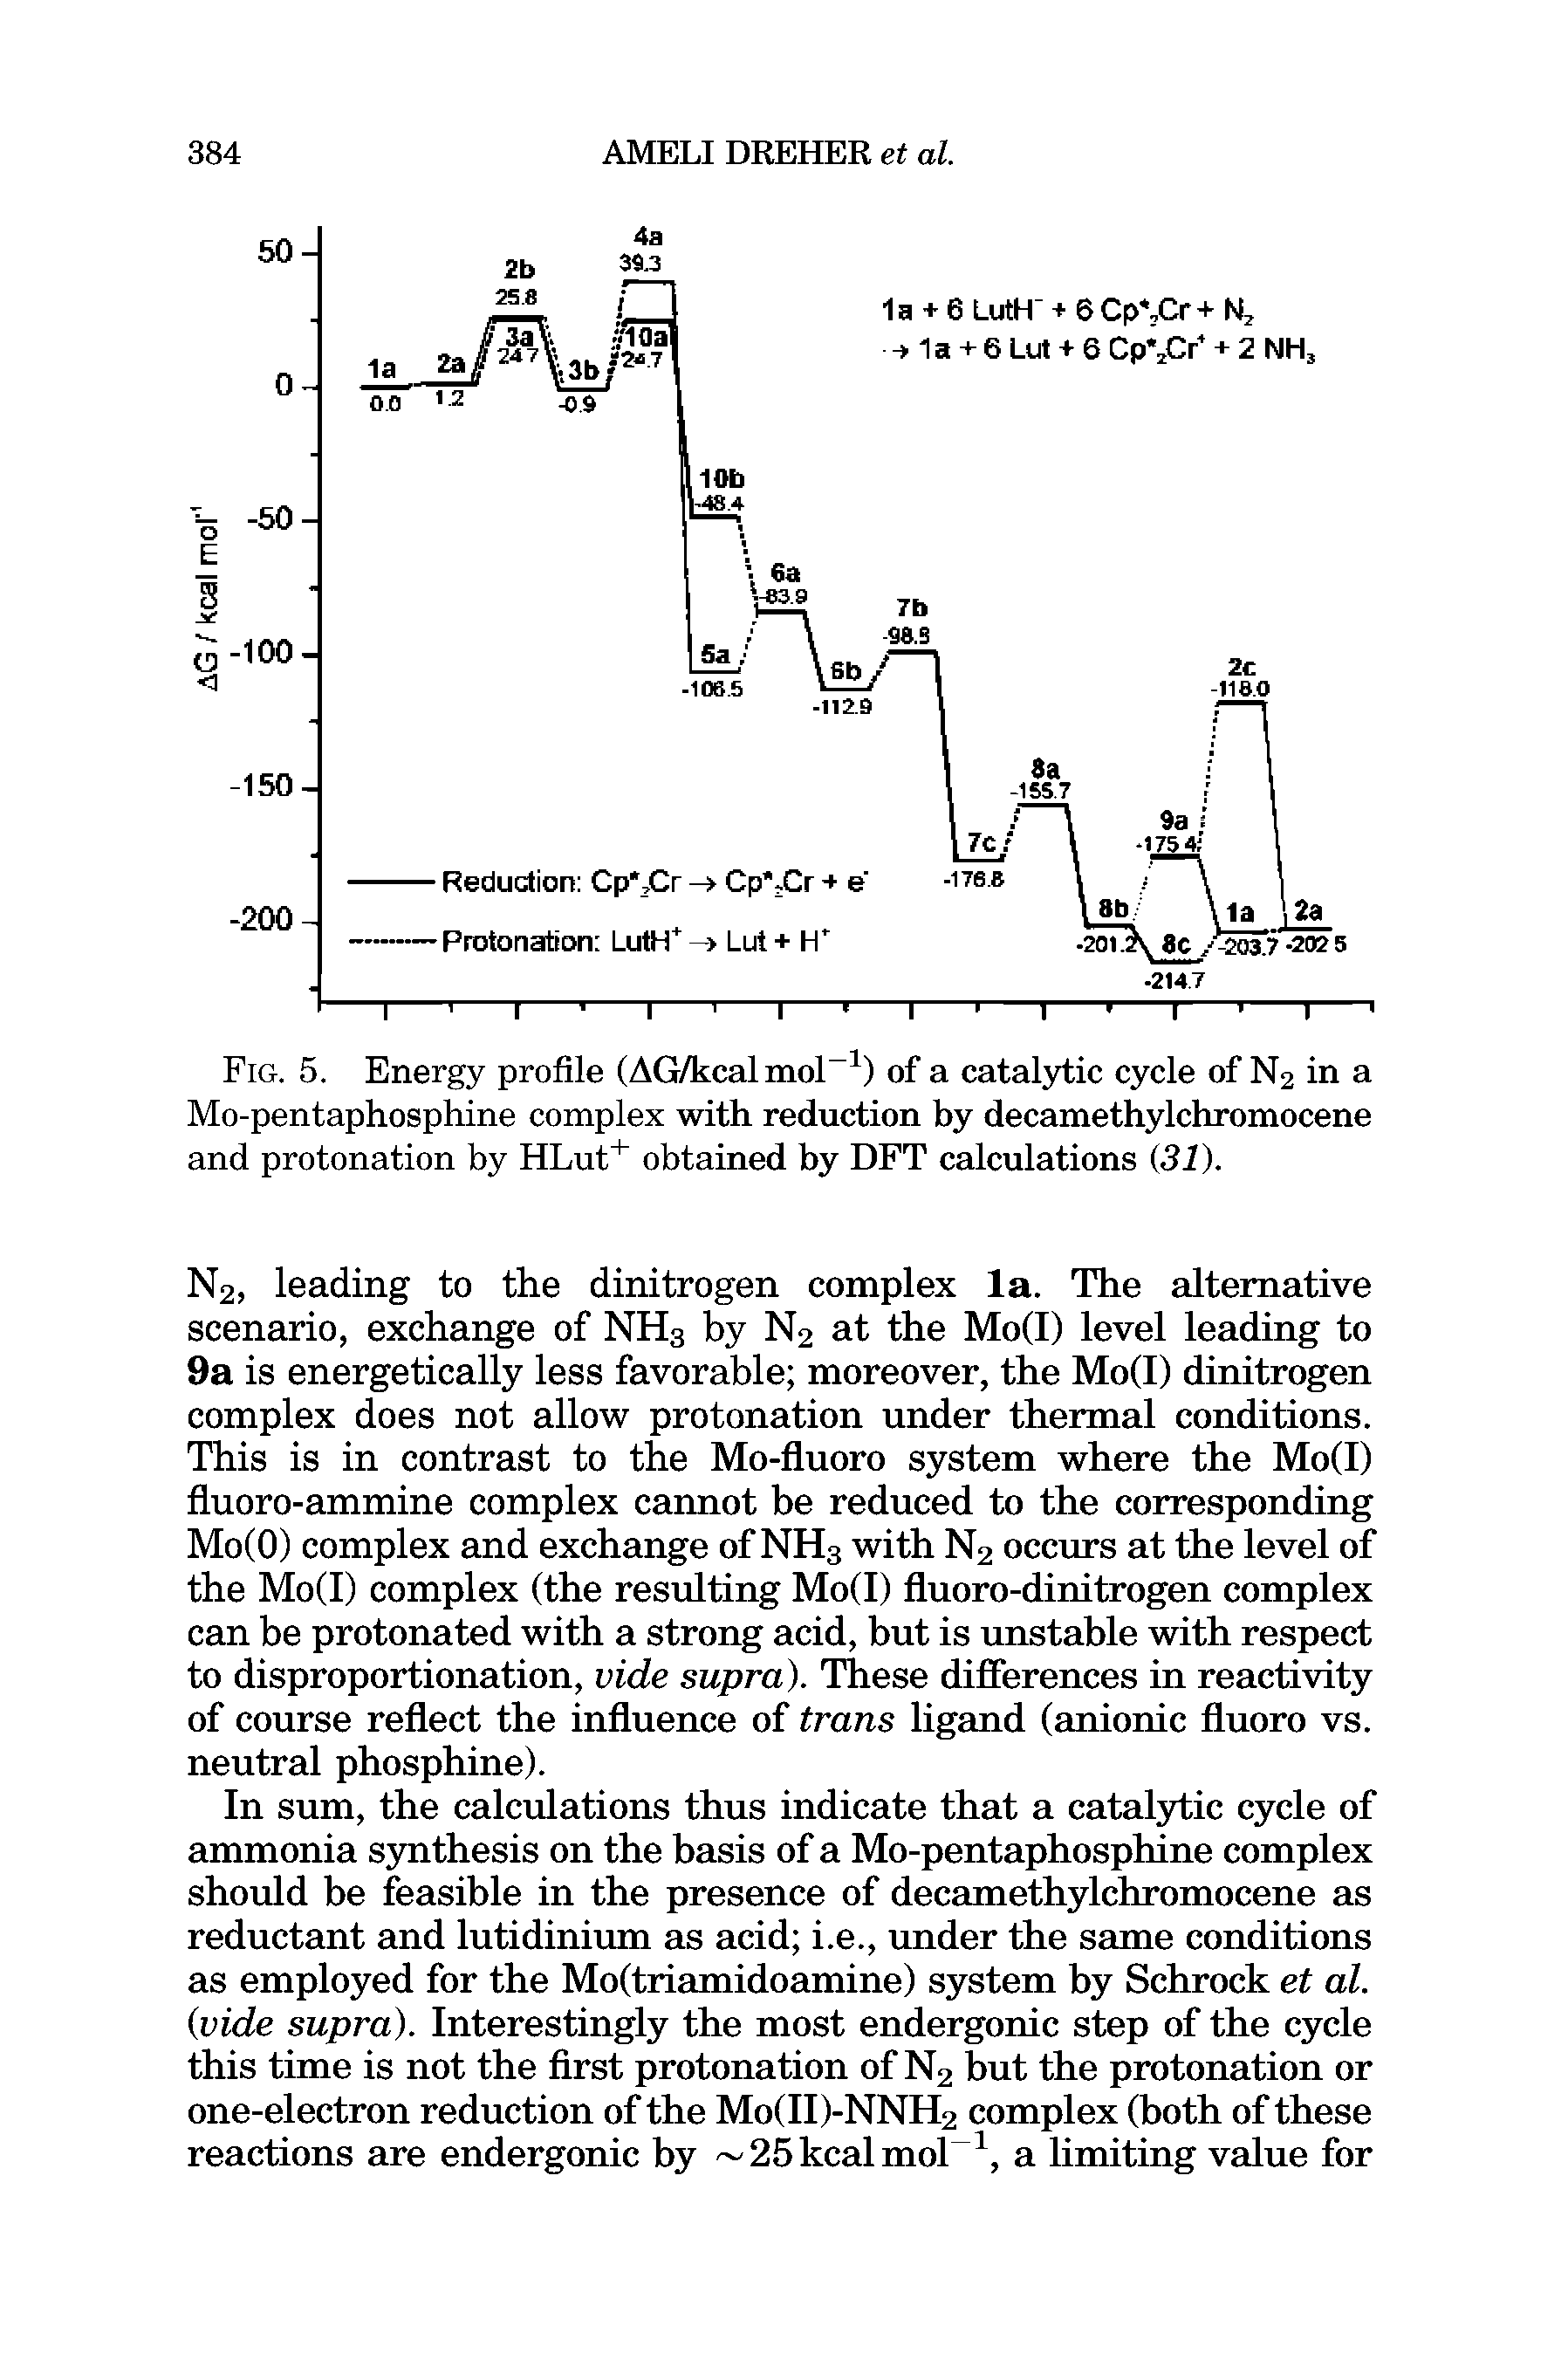 Fig. 5. Energy profile (AG/kcal mol-1) of a catalytic cycle of N2 in a Mo-pentaphosphine complex with reduction by decamethylchromocene and protonation by HLut+ obtained by DFT calculations (31).